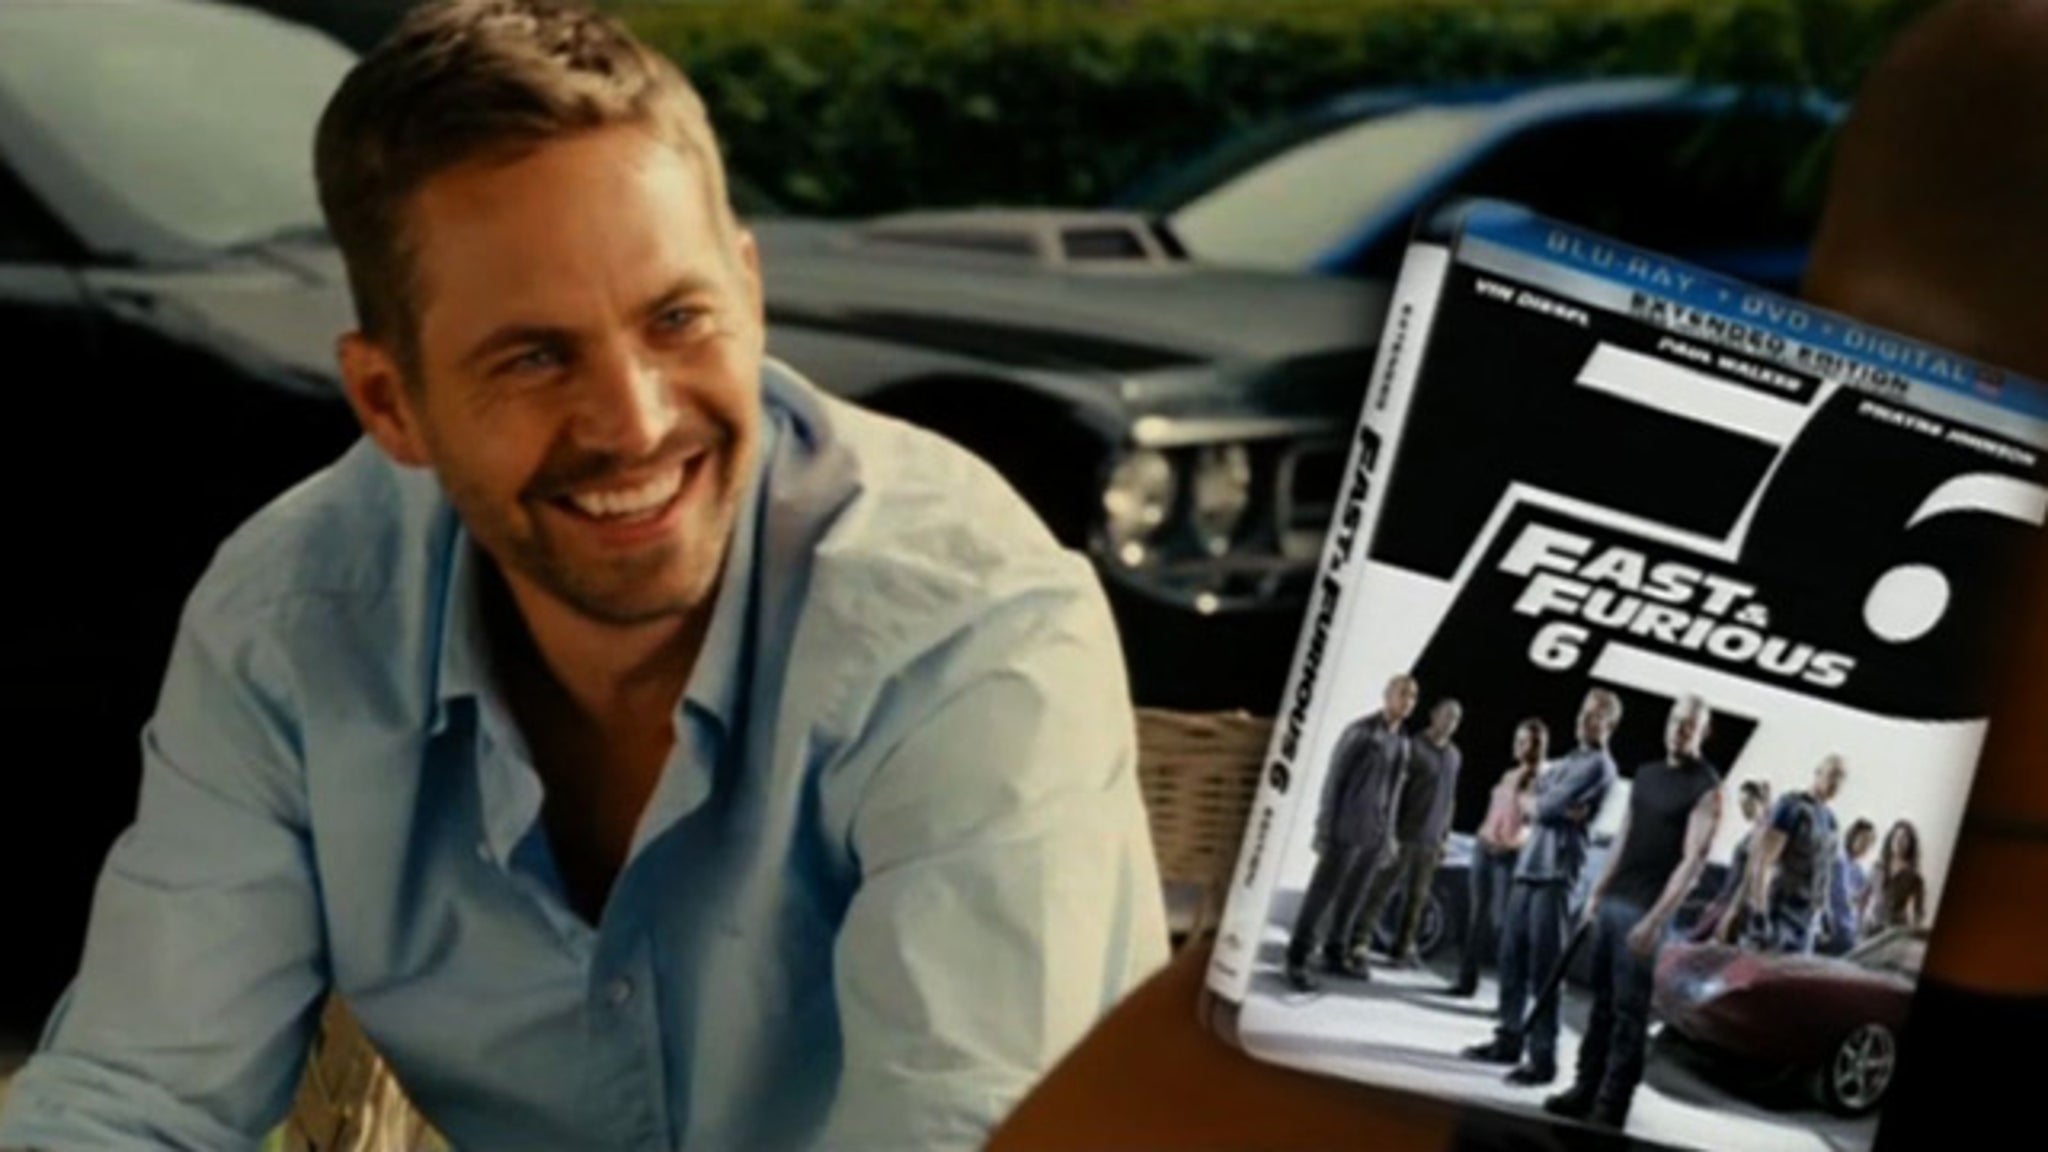 Fast Furious 6 Commercials Were Donating Profits To Paul Walker